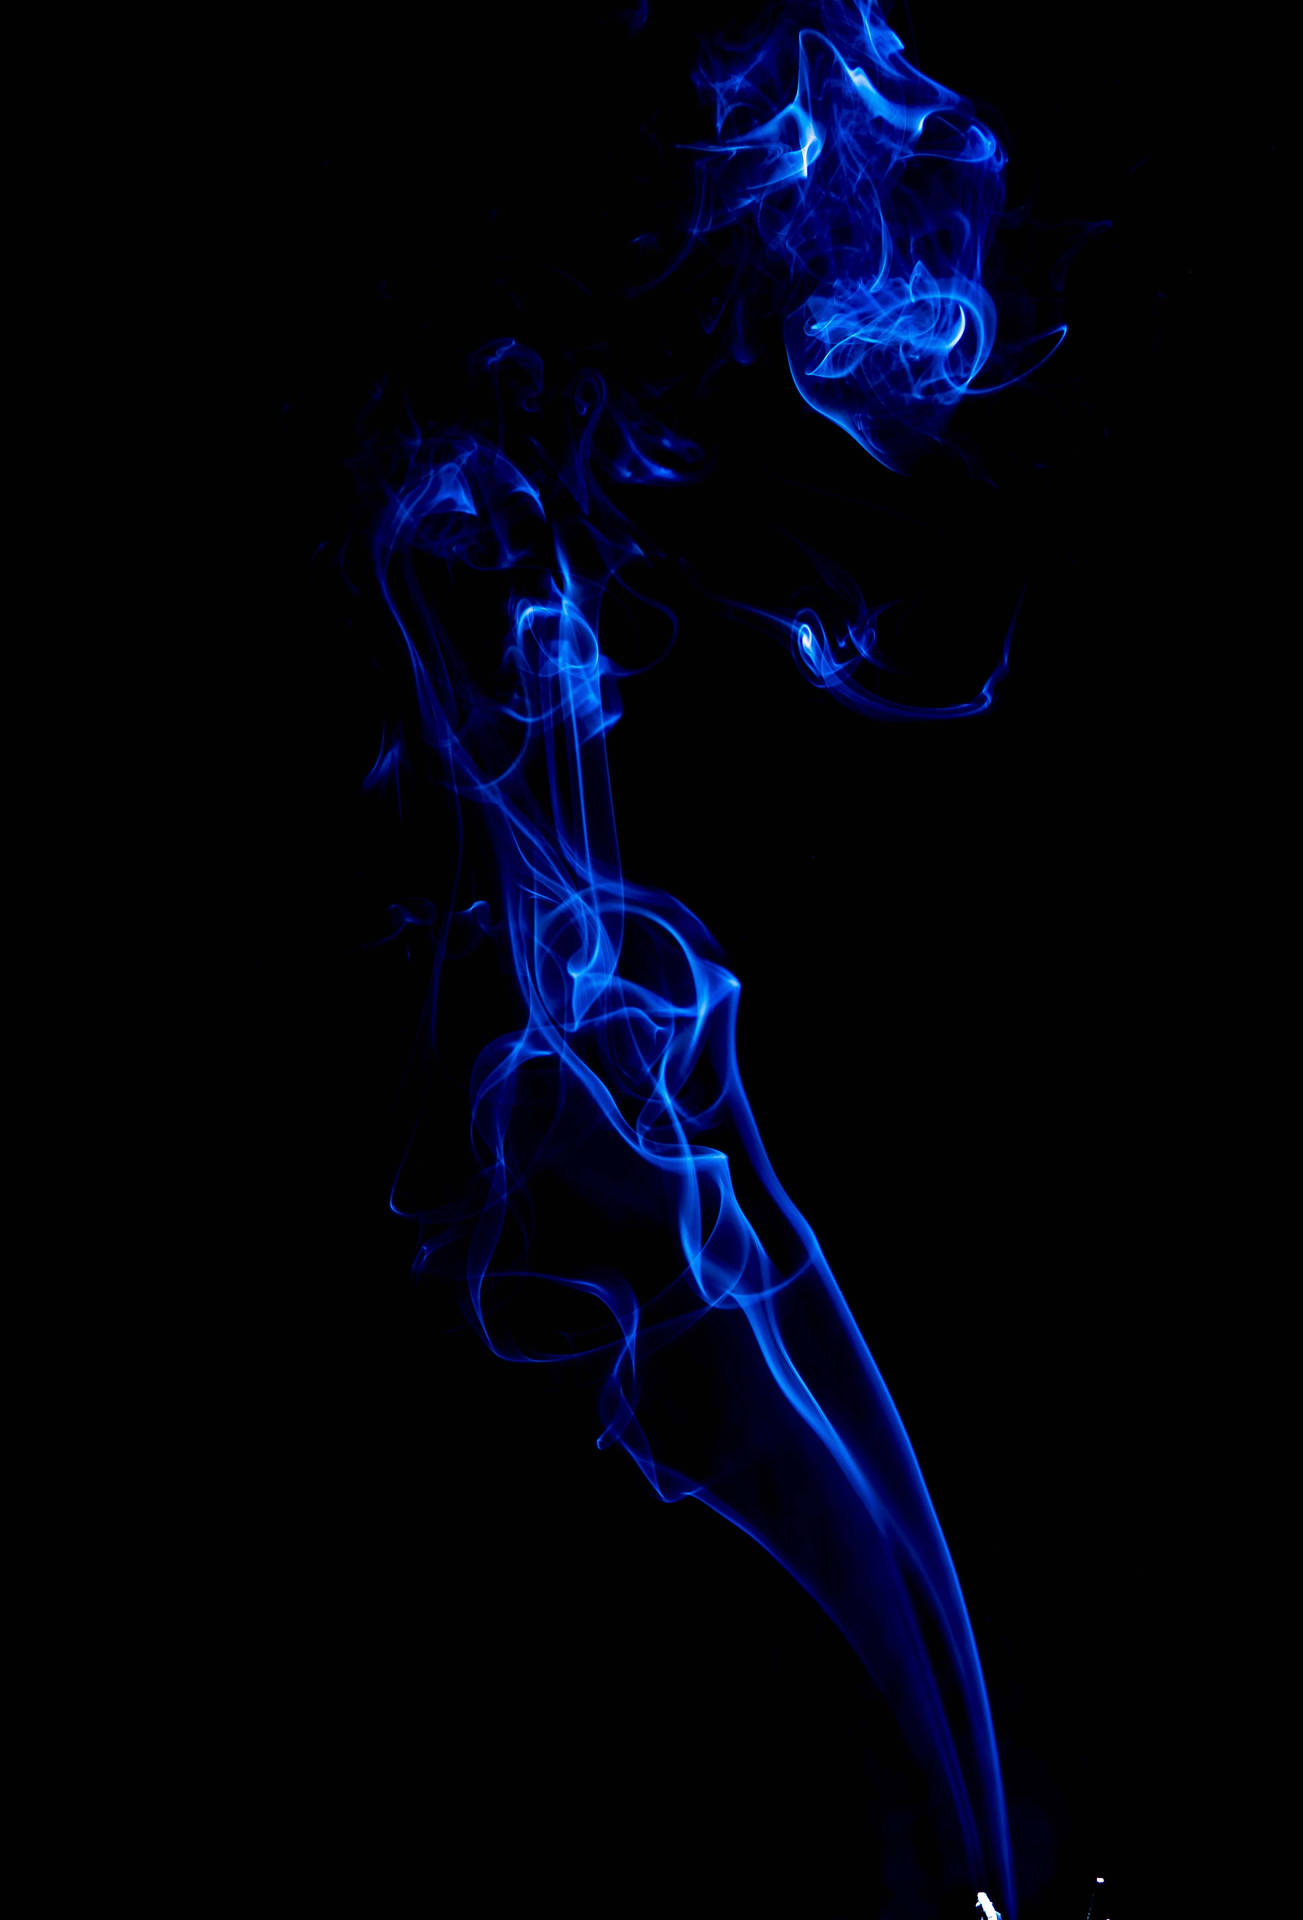 Dark Blue 3482X5129 Wallpaper and Background Image